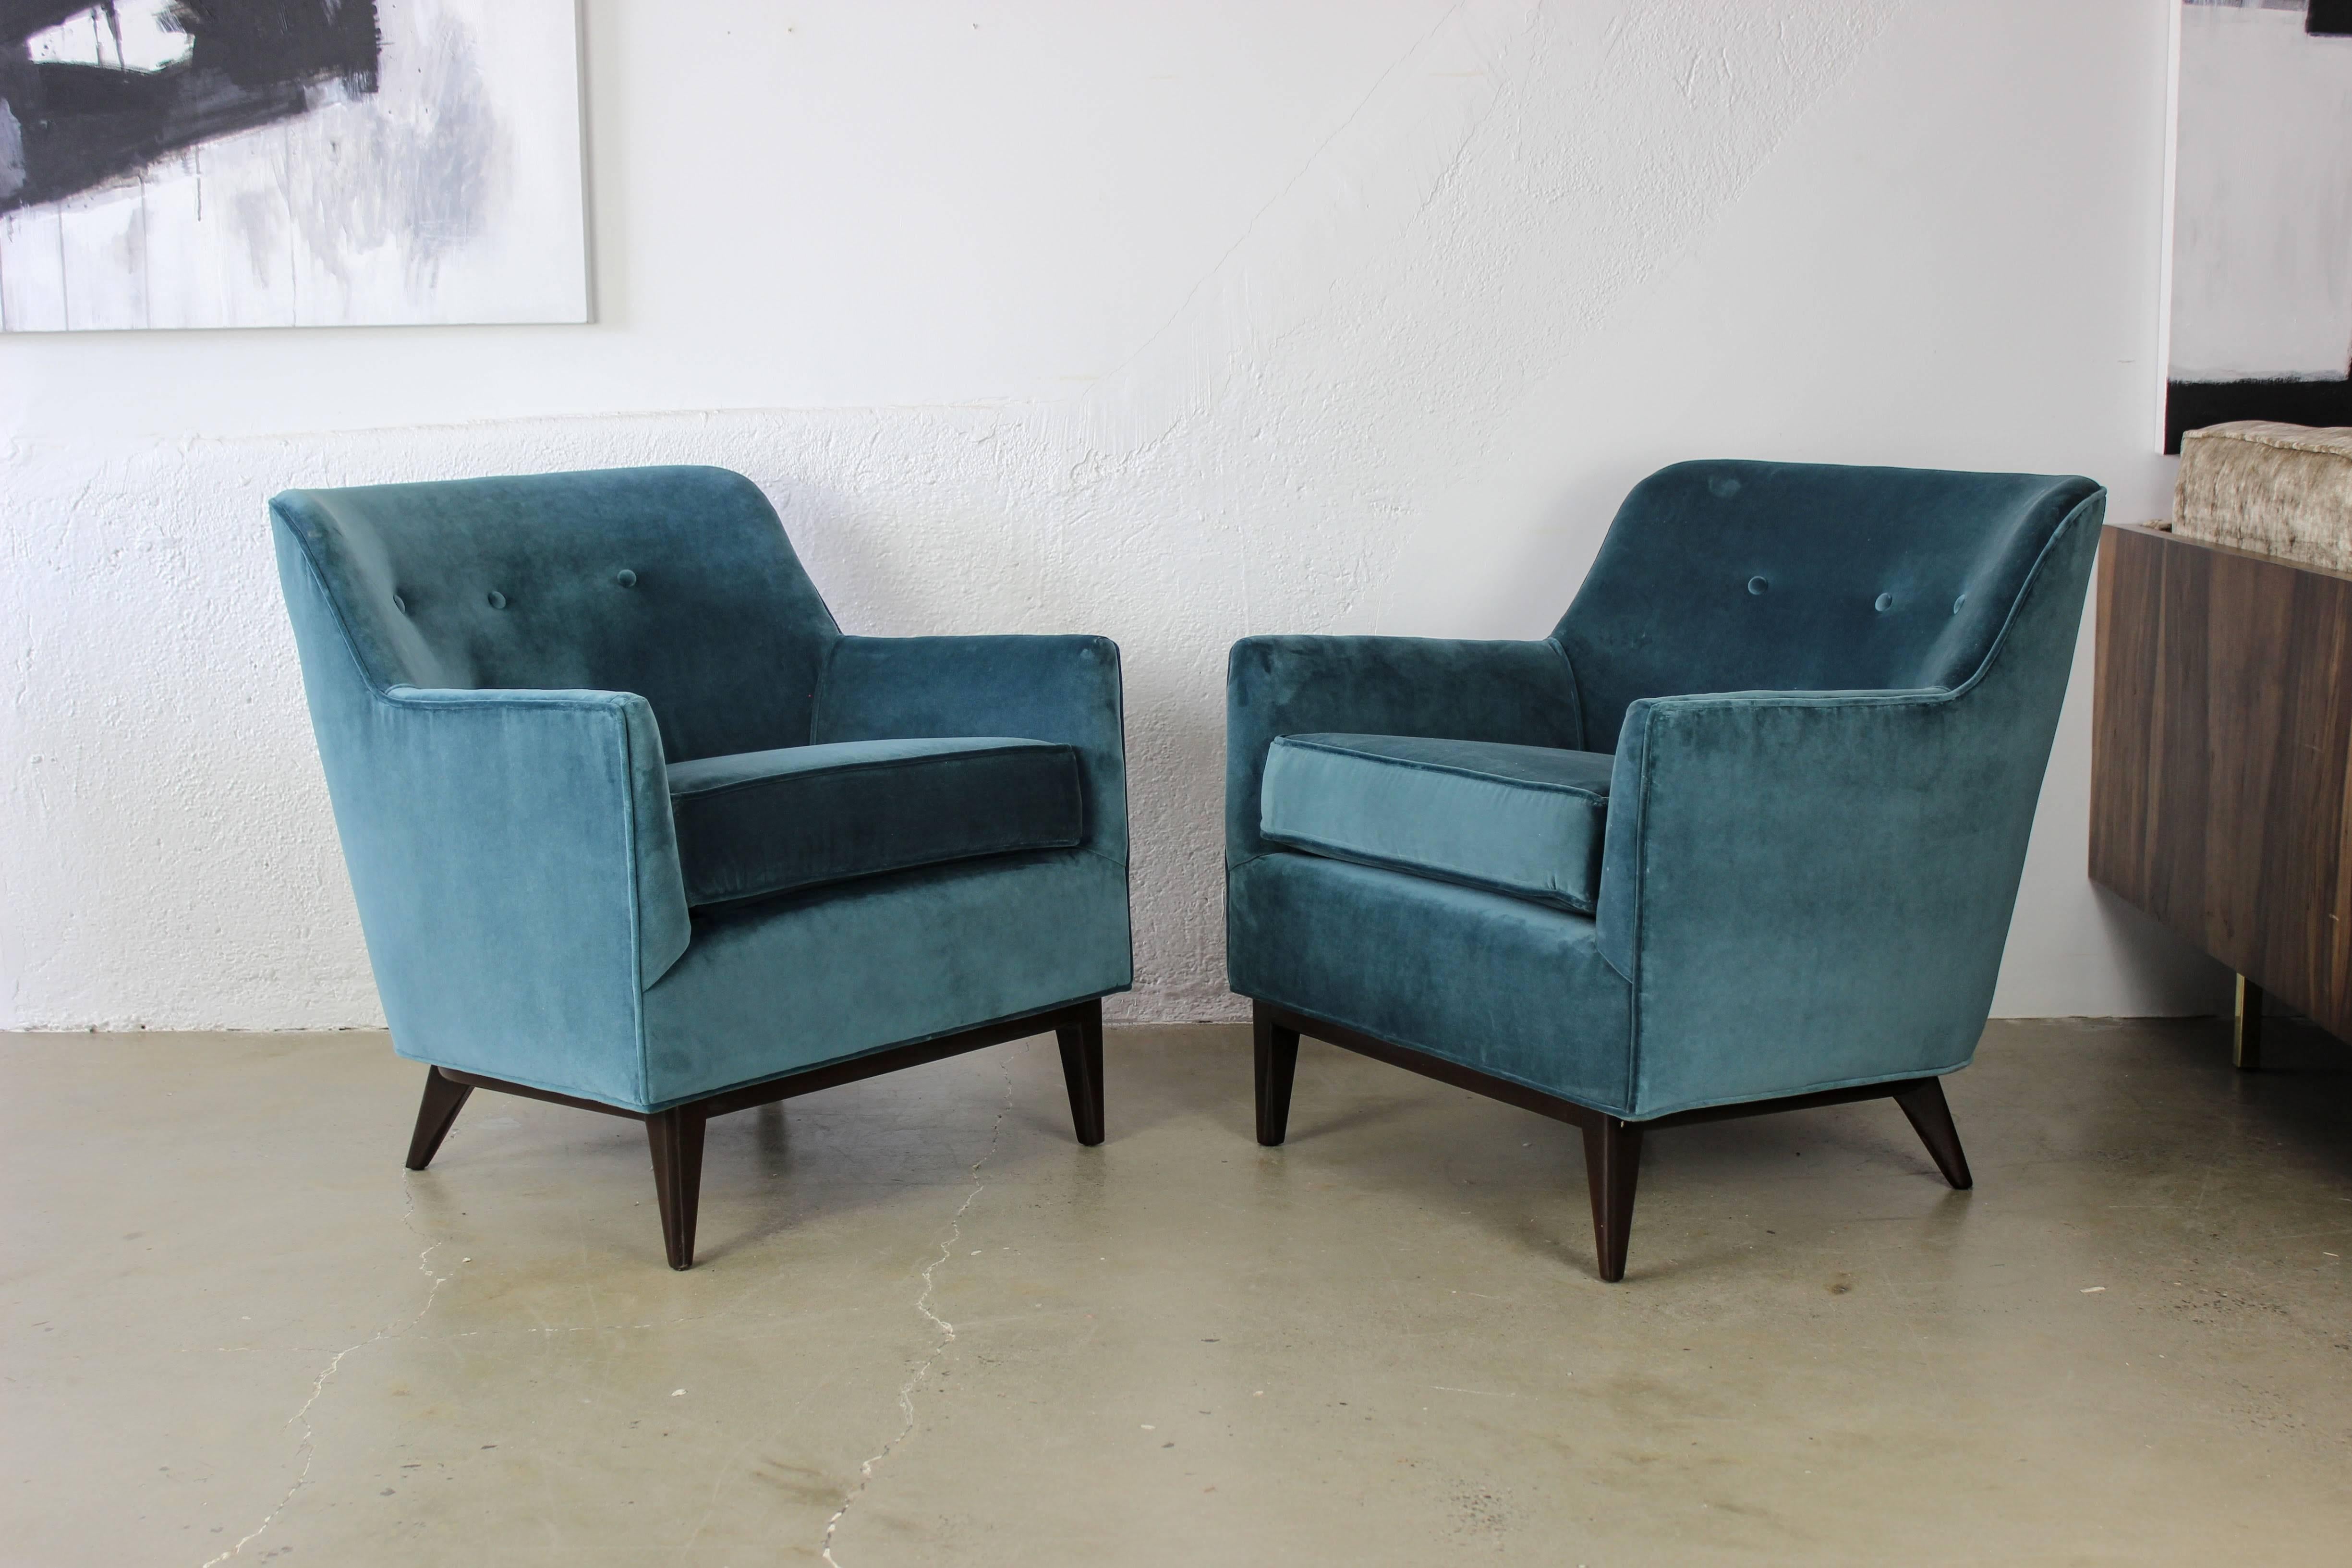 Handsome Mid-Century lounge chairs newly upholstered in a beautiful peacock velvet, 1950s. Bases are a dark walnut finish. Maker is unknown but they are similar to the designs of Milo Baughman, Harvey Probber, and Paul McCobb. Excellent weight and